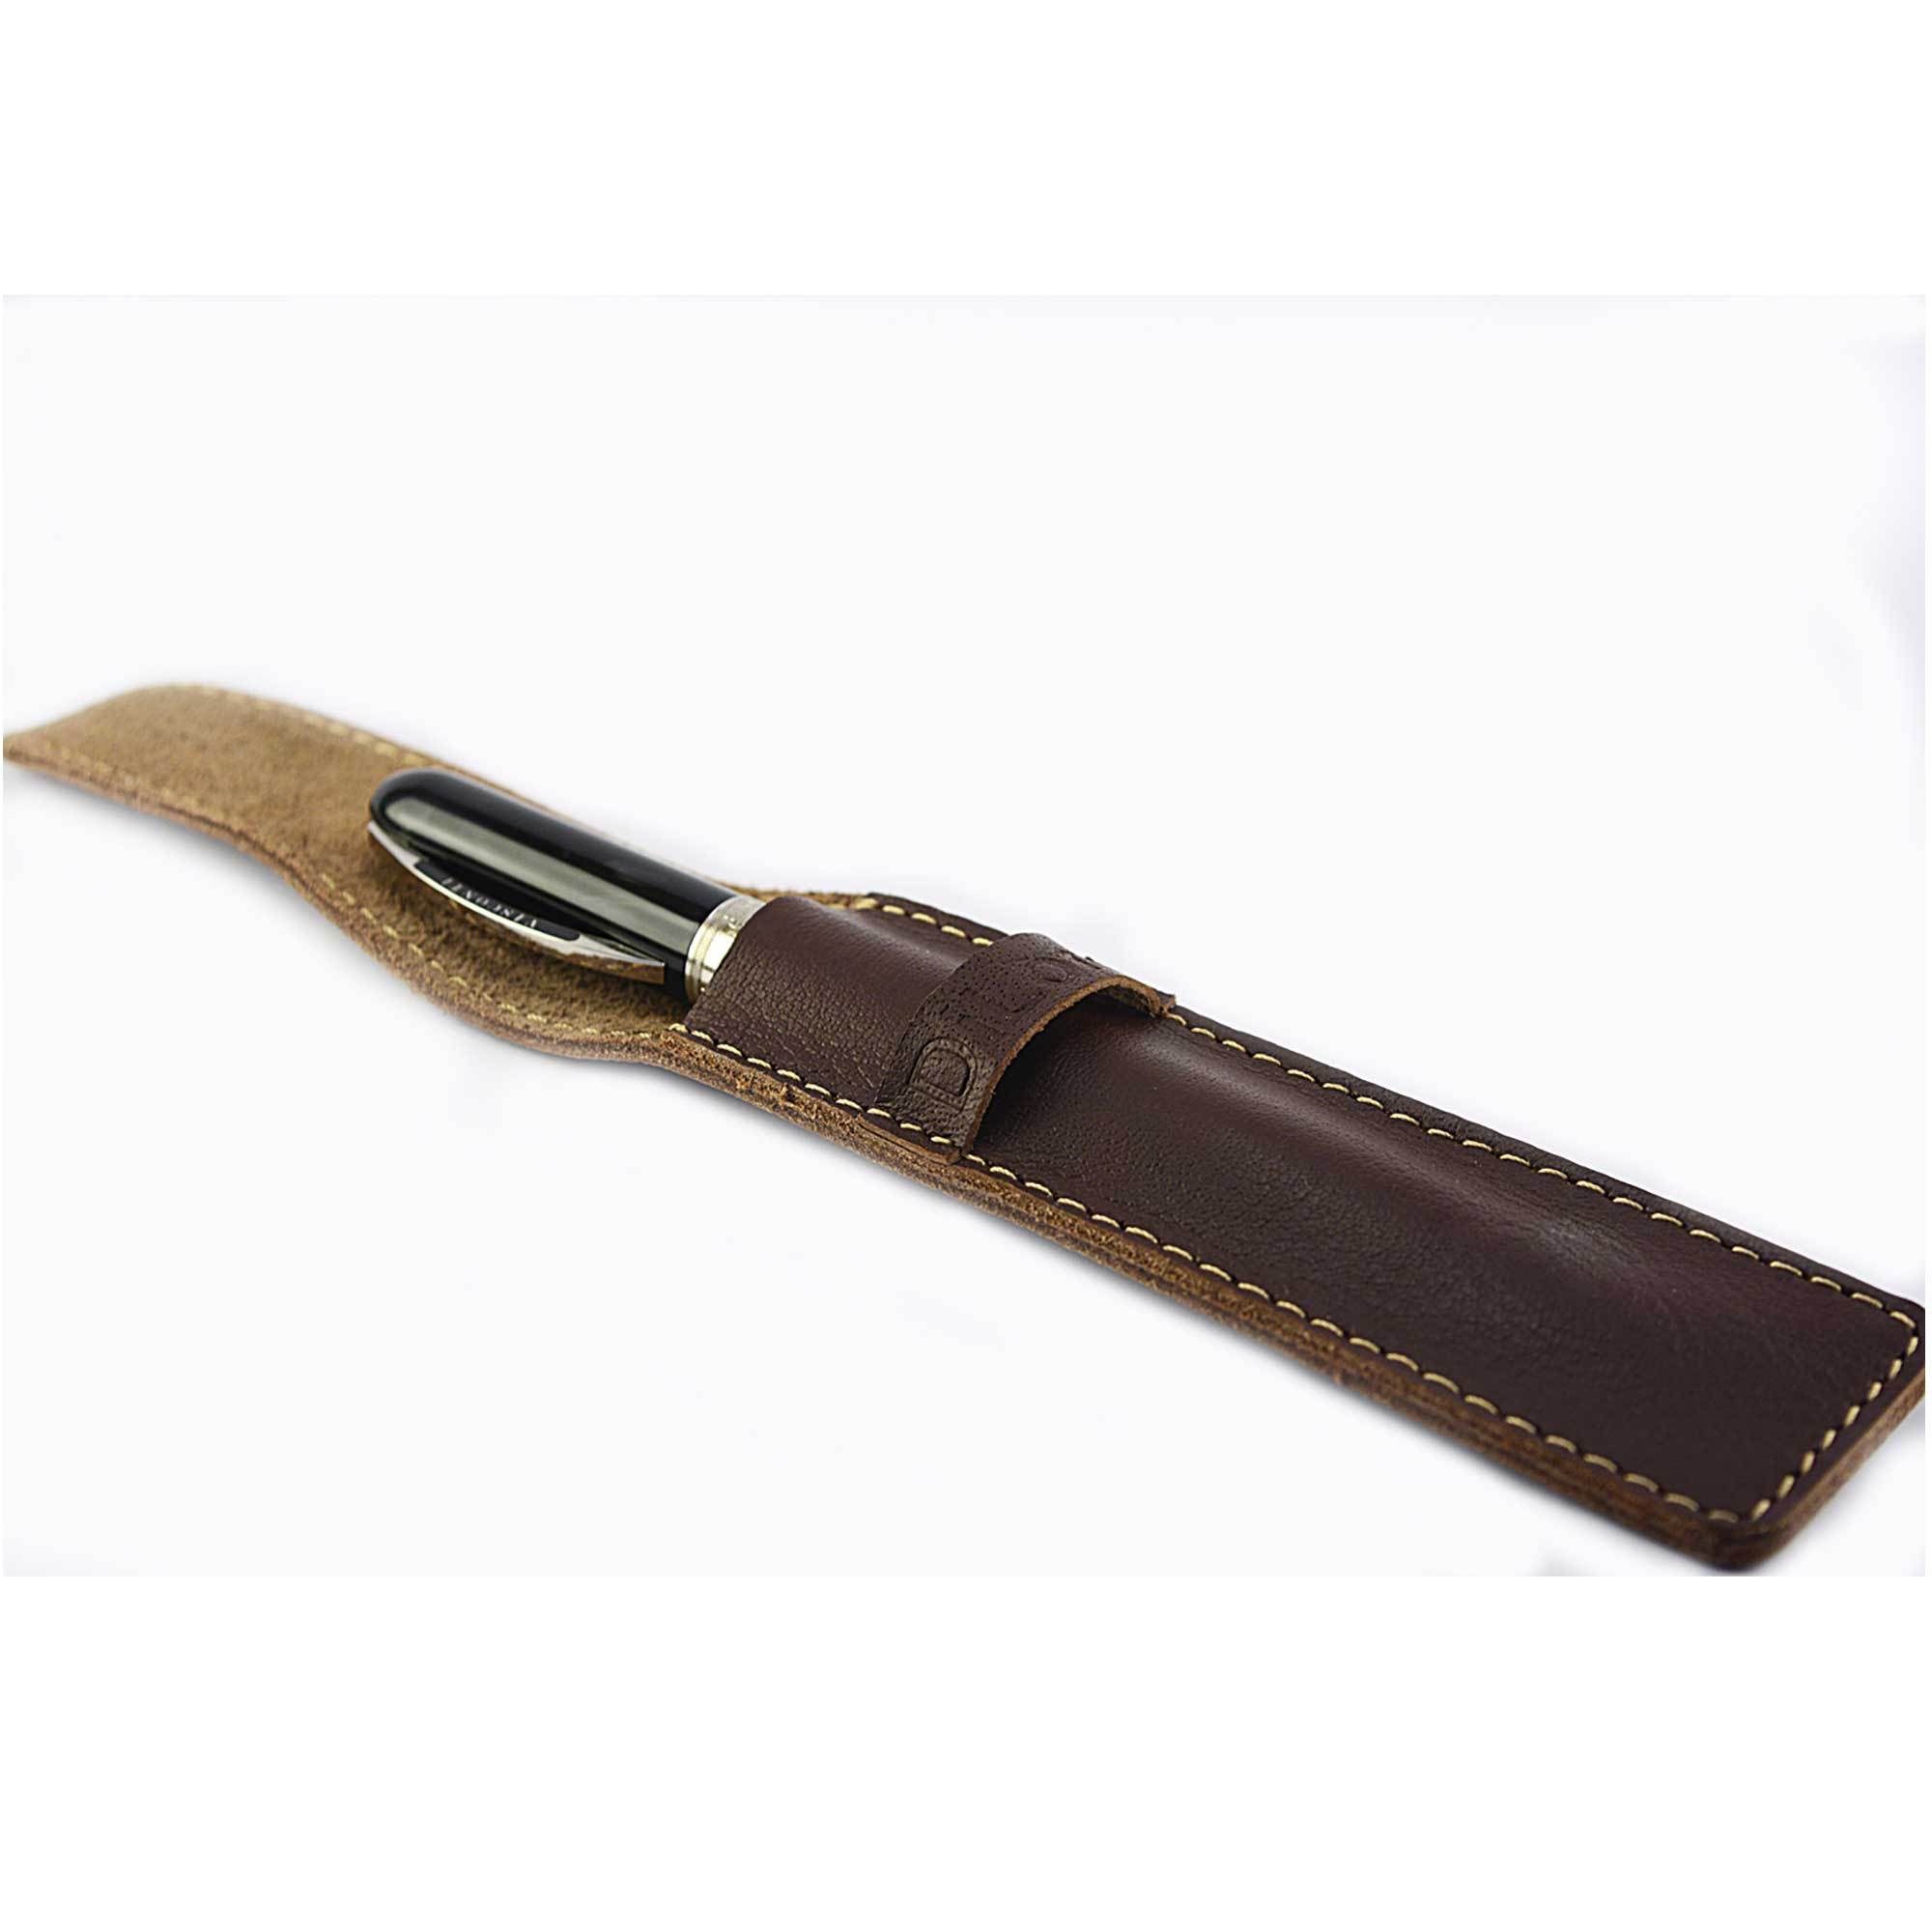 DiLoro Single Leather Pen Holder in Brown Full Grain Leather. Side view open with a Visconti pen inside (pen not included)